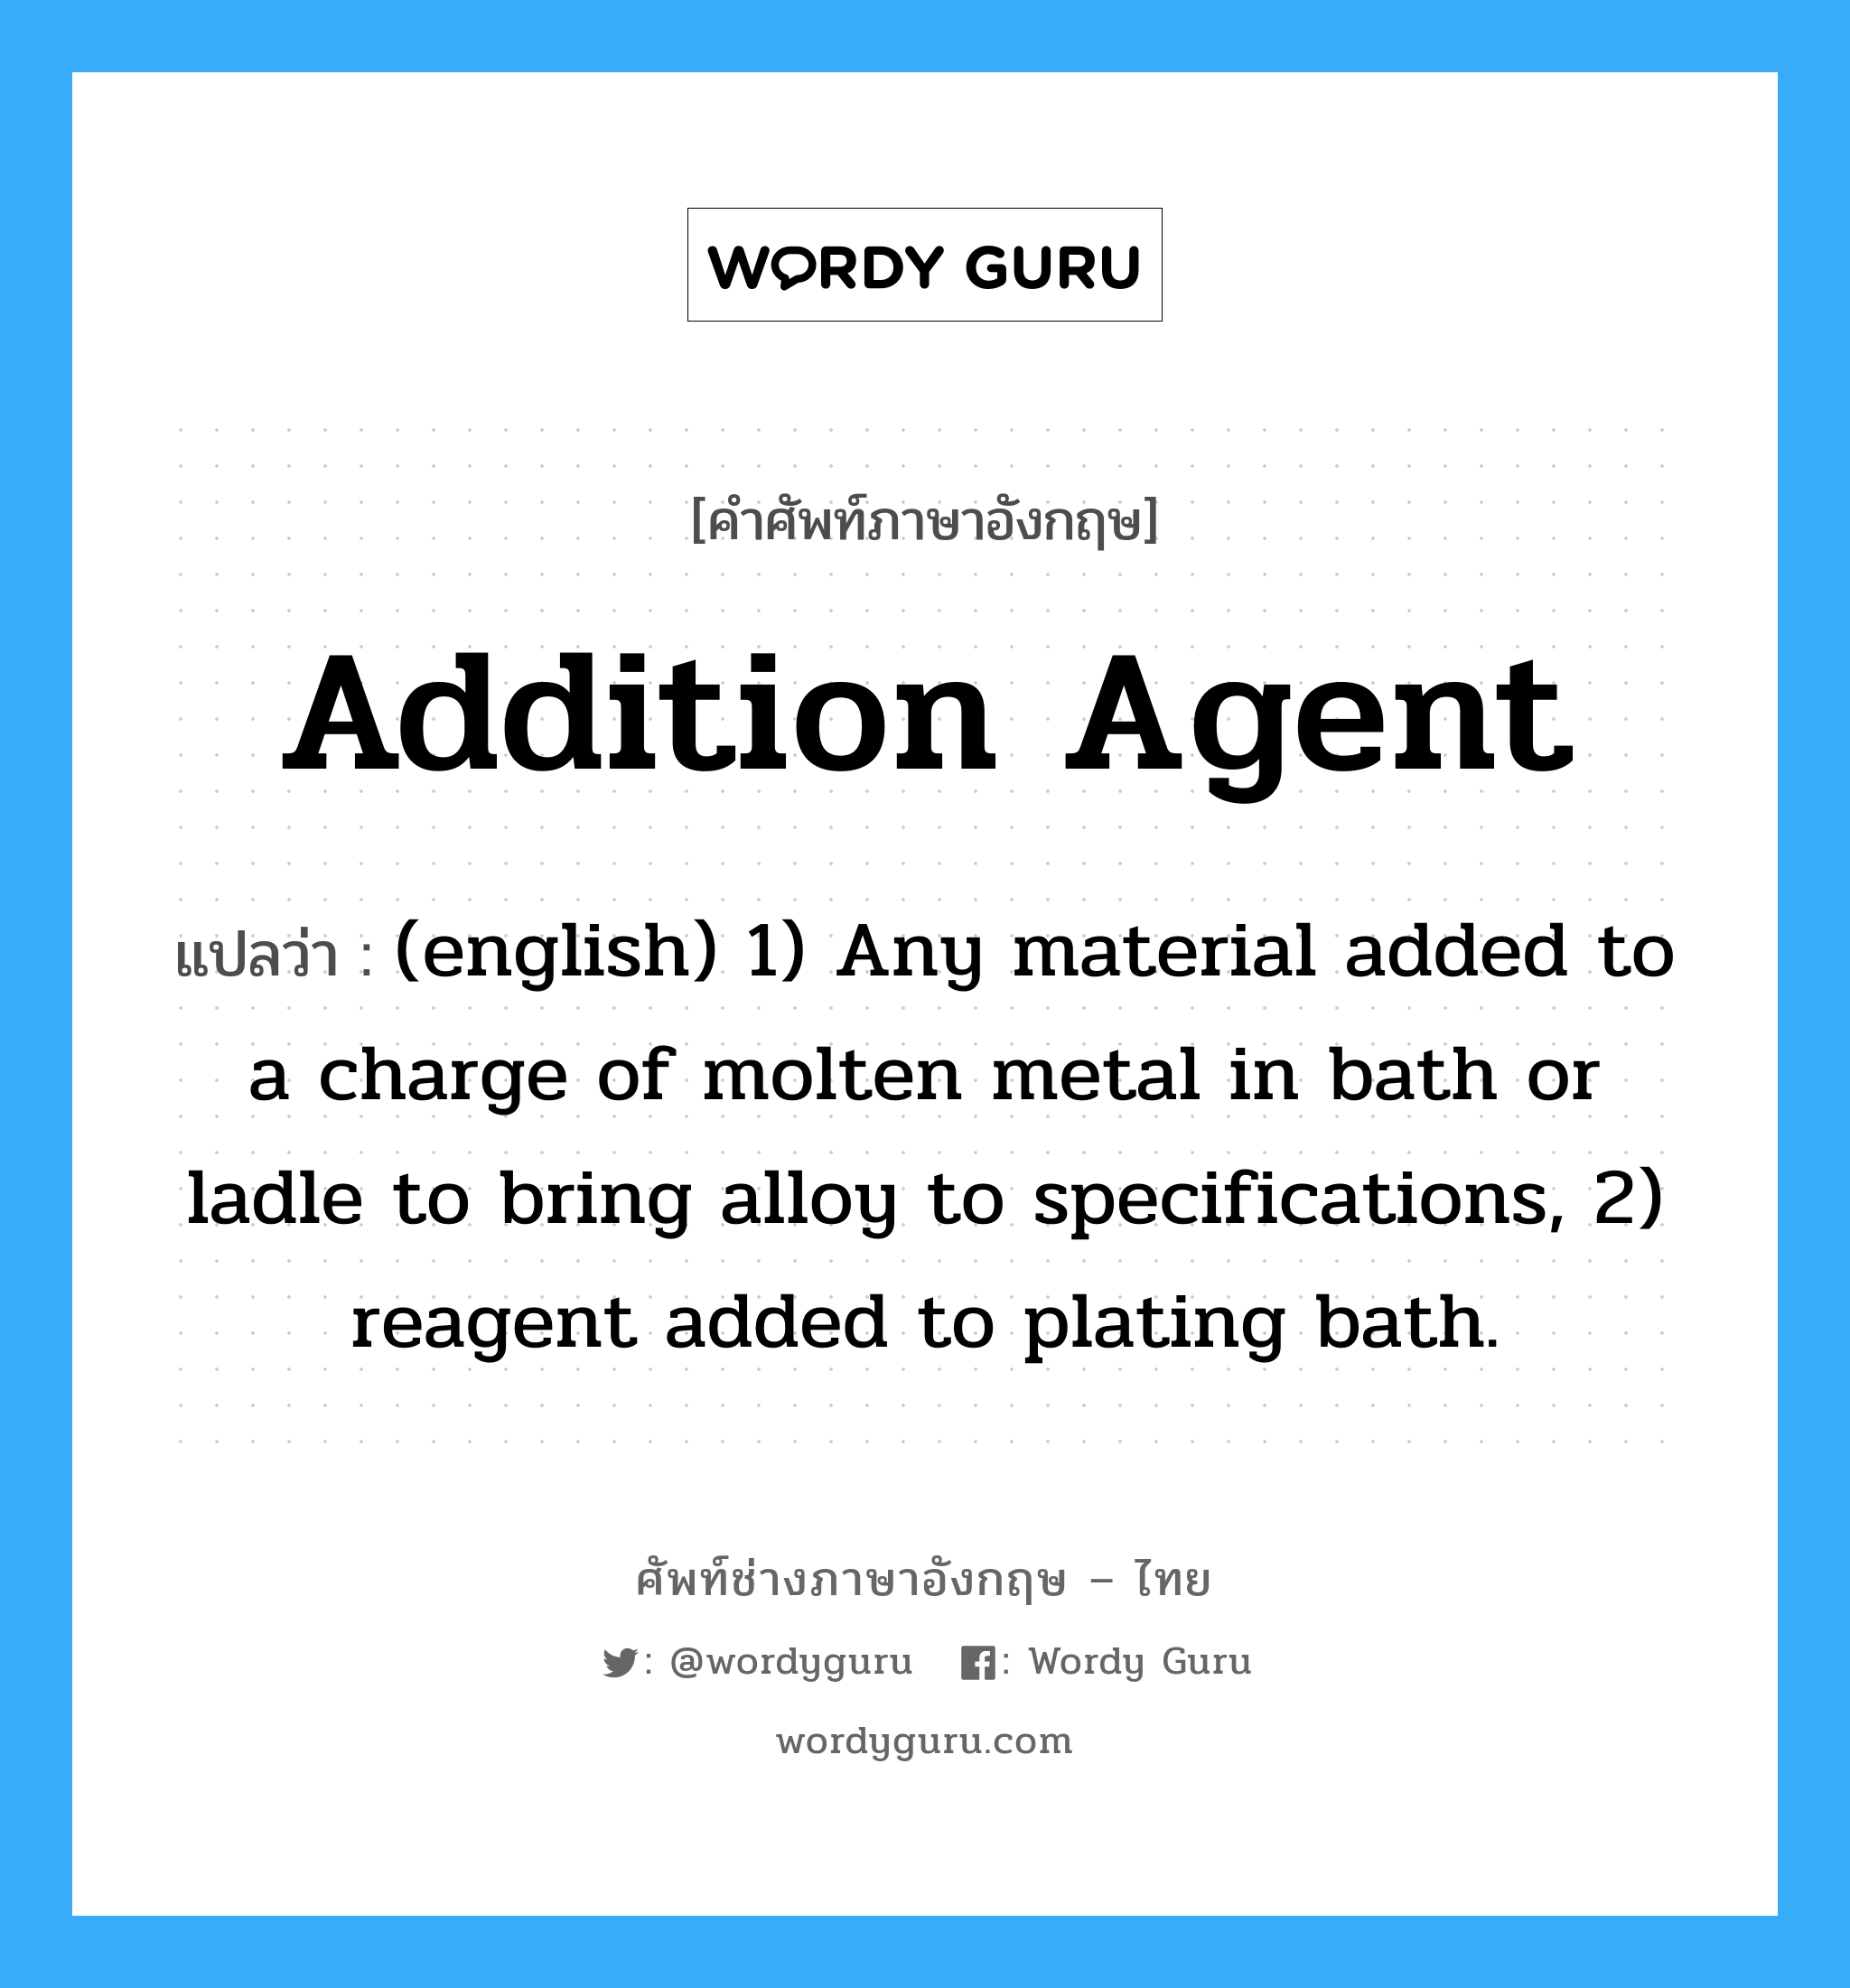 Addition Agent แปลว่า?, คำศัพท์ช่างภาษาอังกฤษ - ไทย Addition Agent คำศัพท์ภาษาอังกฤษ Addition Agent แปลว่า (english) 1) Any material added to a charge of molten metal in bath or ladle to bring alloy to specifications, 2) reagent added to plating bath.